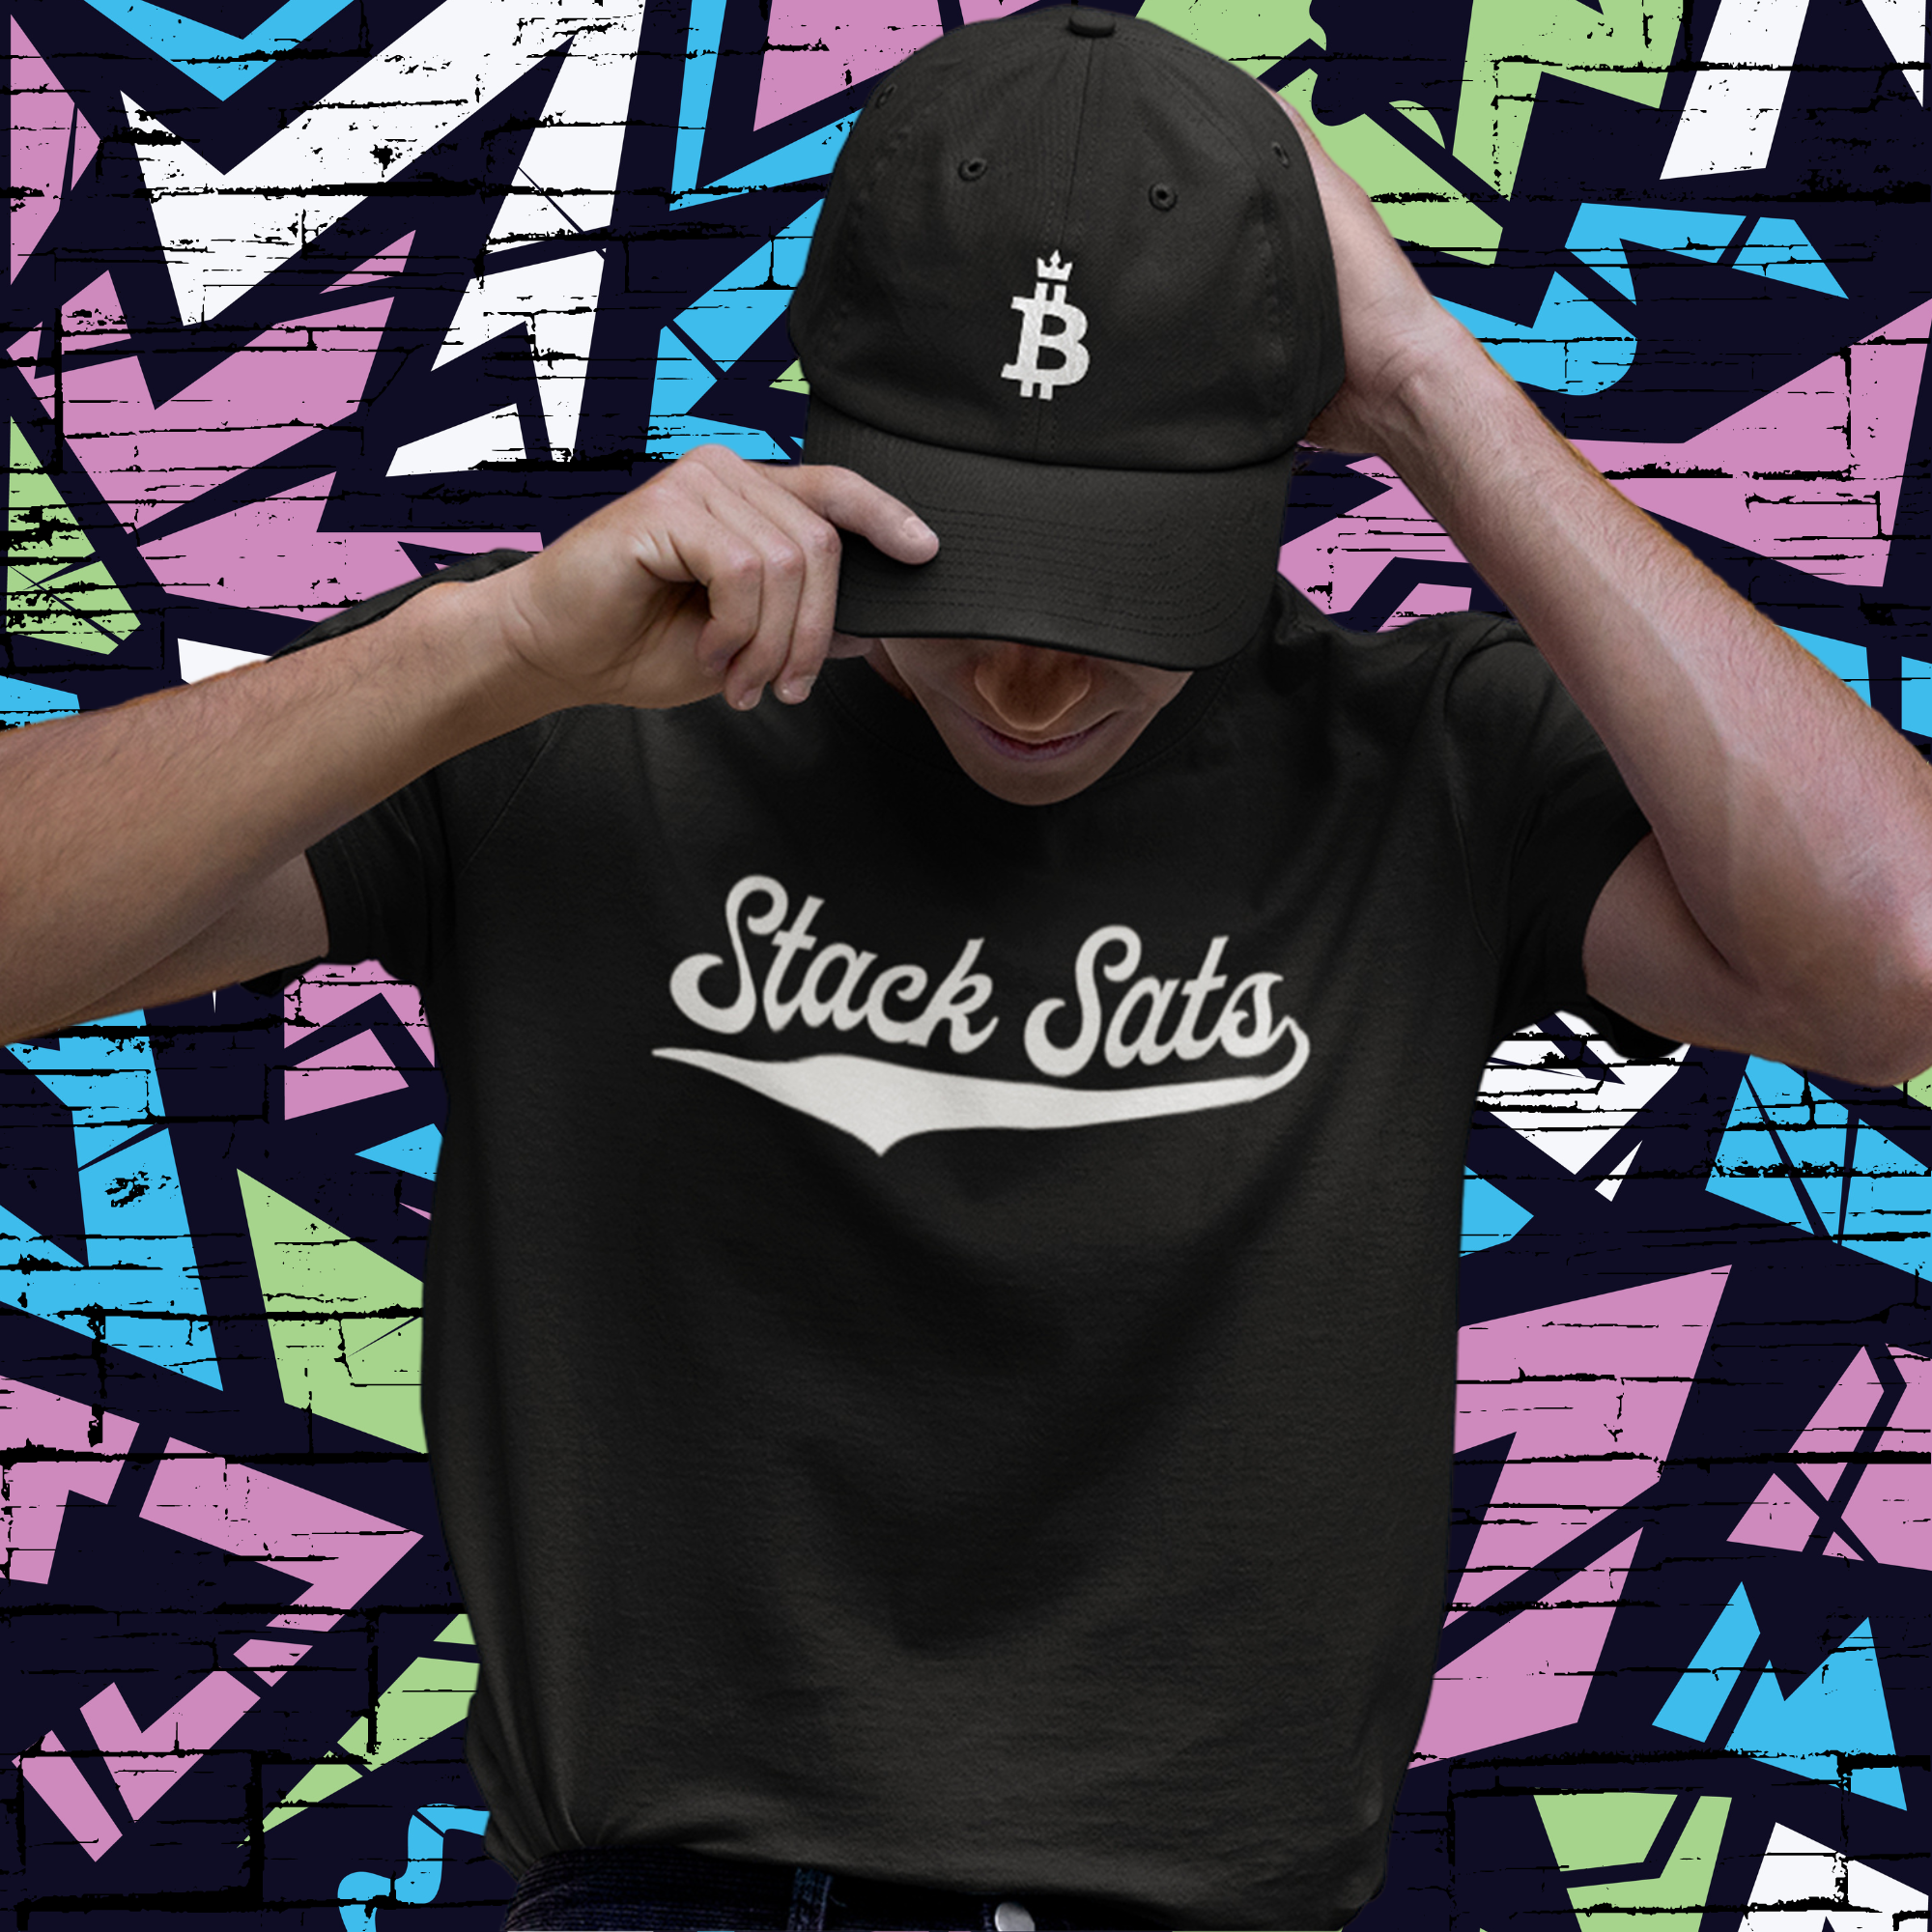 Stack Sats Shirt and Bitcoin Dominance Cap worn by male model. Front view.